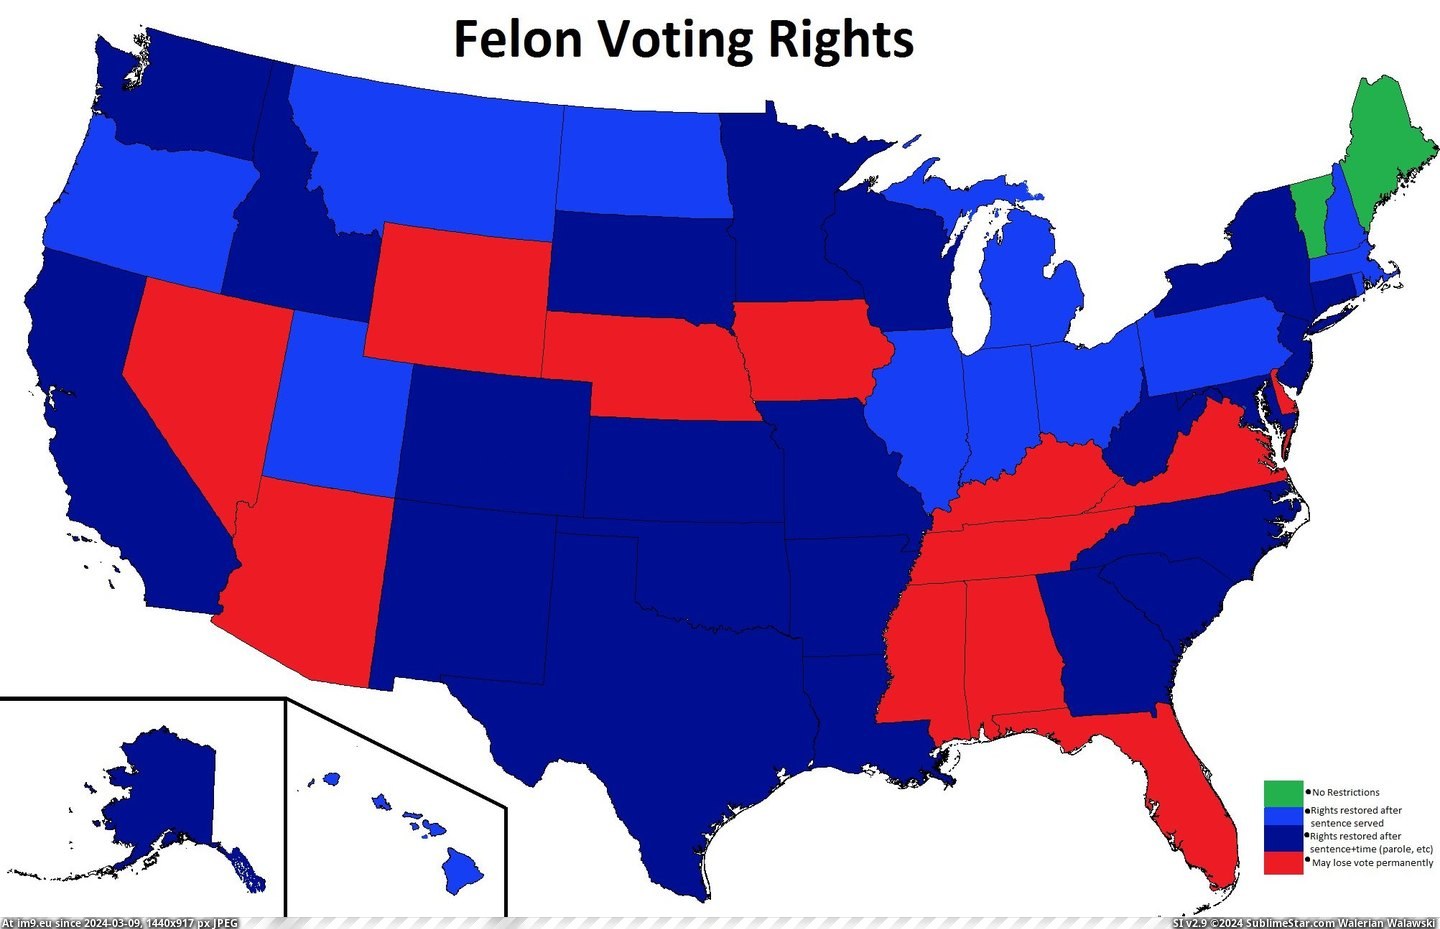 #Usa #Voting #Felon #Rights #2005x1289 [Mapporn] Felon Voting Rights in the USA [2005x1289] [OC] Pic. (Изображение из альбом My r/MAPS favs))